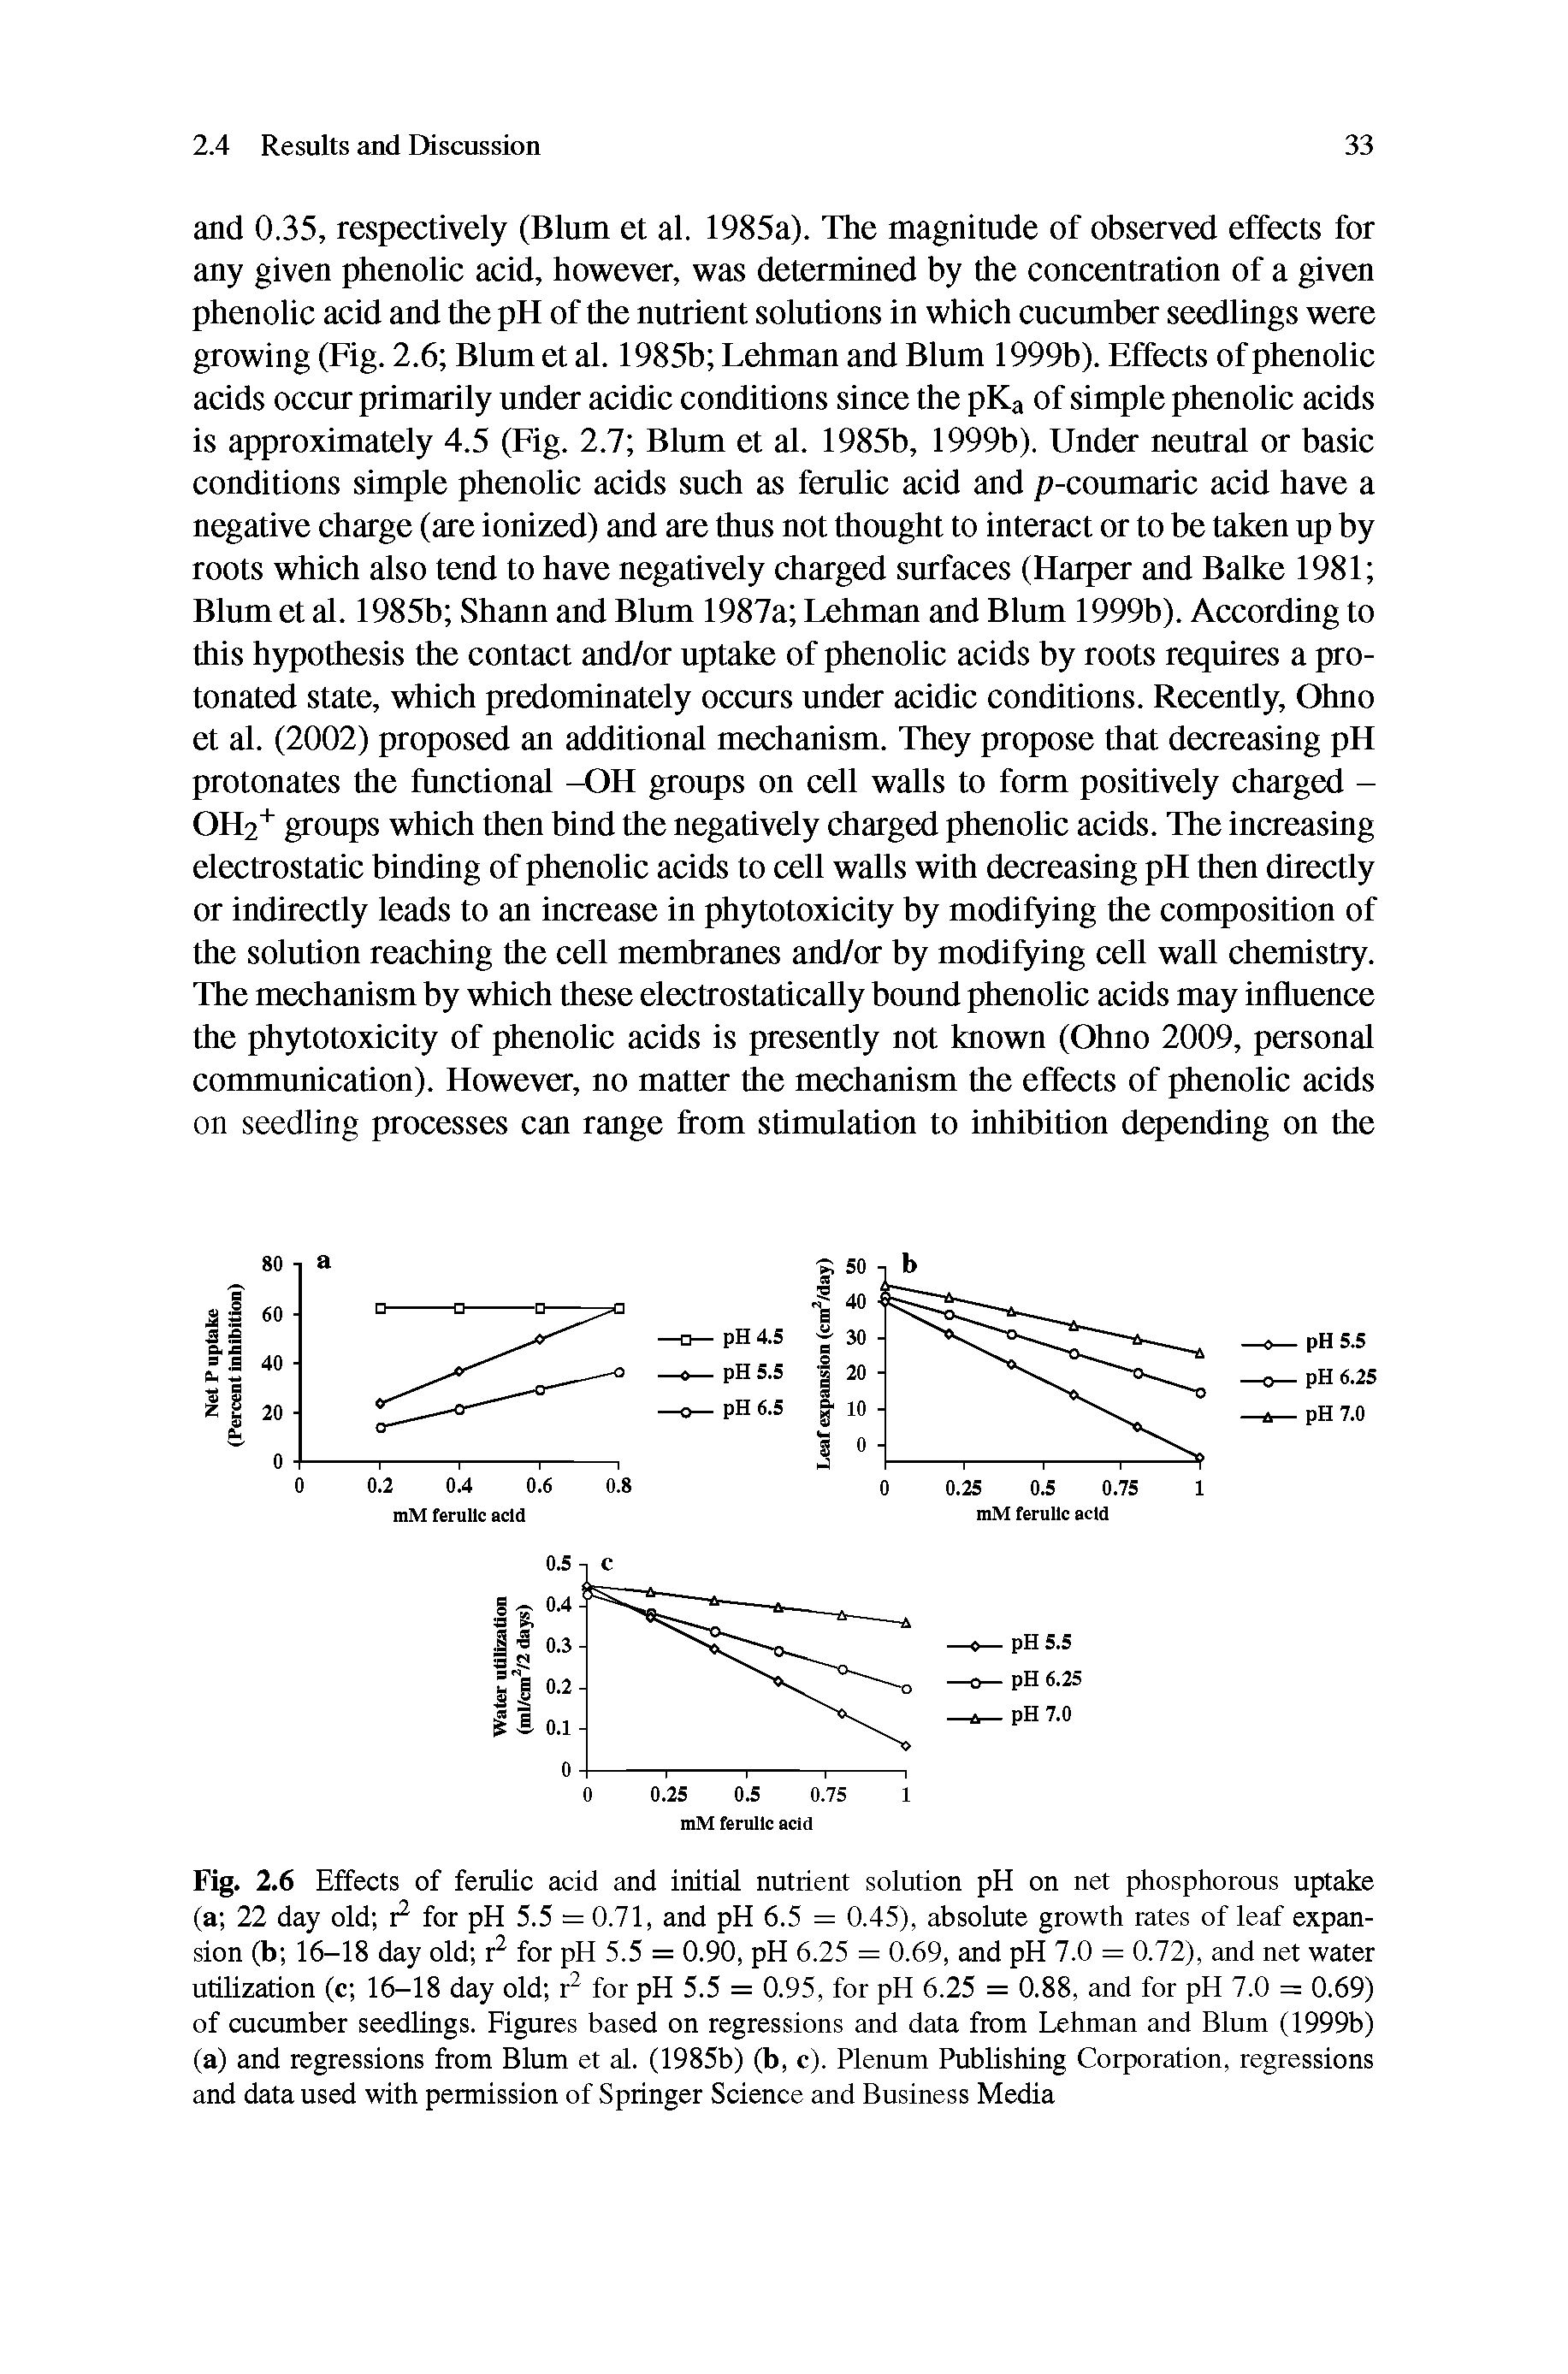 Fig. 2.6 Effects of ferulic acid and initial nutrient solution pH on net phosphorous uptake (a 22 day old r for pH 5.5 = 0.71, and pH 6.5 = 0.45), absolute growth rates of leaf expansion (b 16-18 day old r for pH 5.5 = 0.90, pH 6.25 = 0.69, and pH 7.0 = 0.72), and net water utilization (c 16-18 day old r for pH 5.5 = 0.95, for pH 6.25 = 0.88, and for pH 7.0 = 0.69) of cucumber seedlings. Figures based on regressions and data from Lehman and Blum (1999b) (a) and regressions from Blum et al. (1985b) (b, c). Plenum Publishing Corporation, regressions and data used with permission of Springer Science and Business Media...